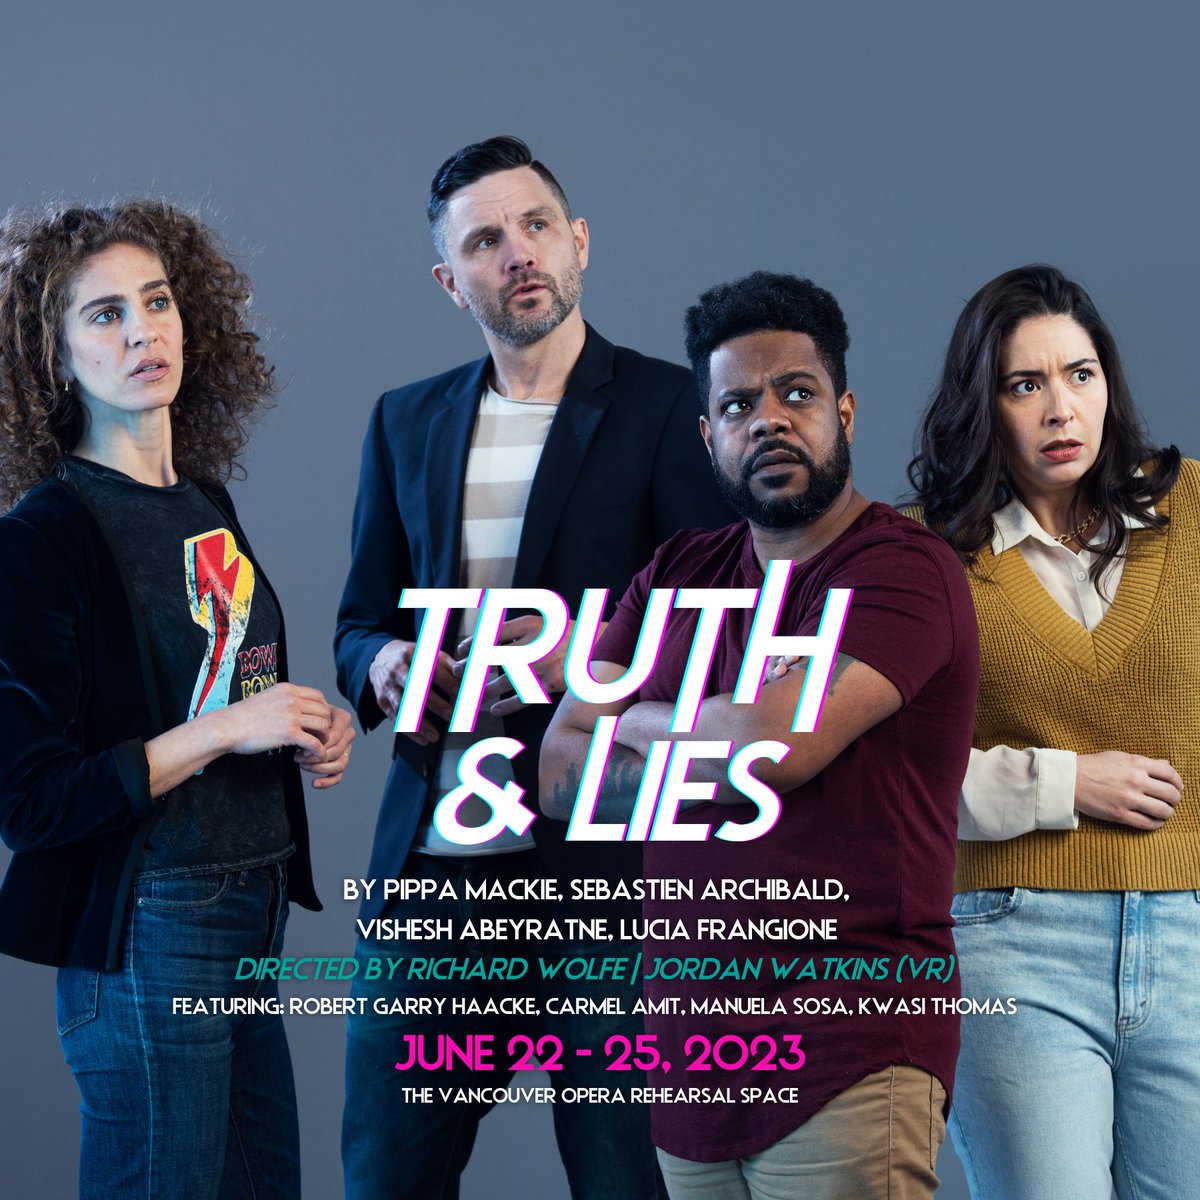 Our friends over @pitheatre have their final production of the 2022/3 season coming up: TRUTH & LIES! | June 22 - 25, 2023 | 🎟️tickettailor.com/events/pitheat… #pitheatre #fearlesstheatre #vancouvertheatre